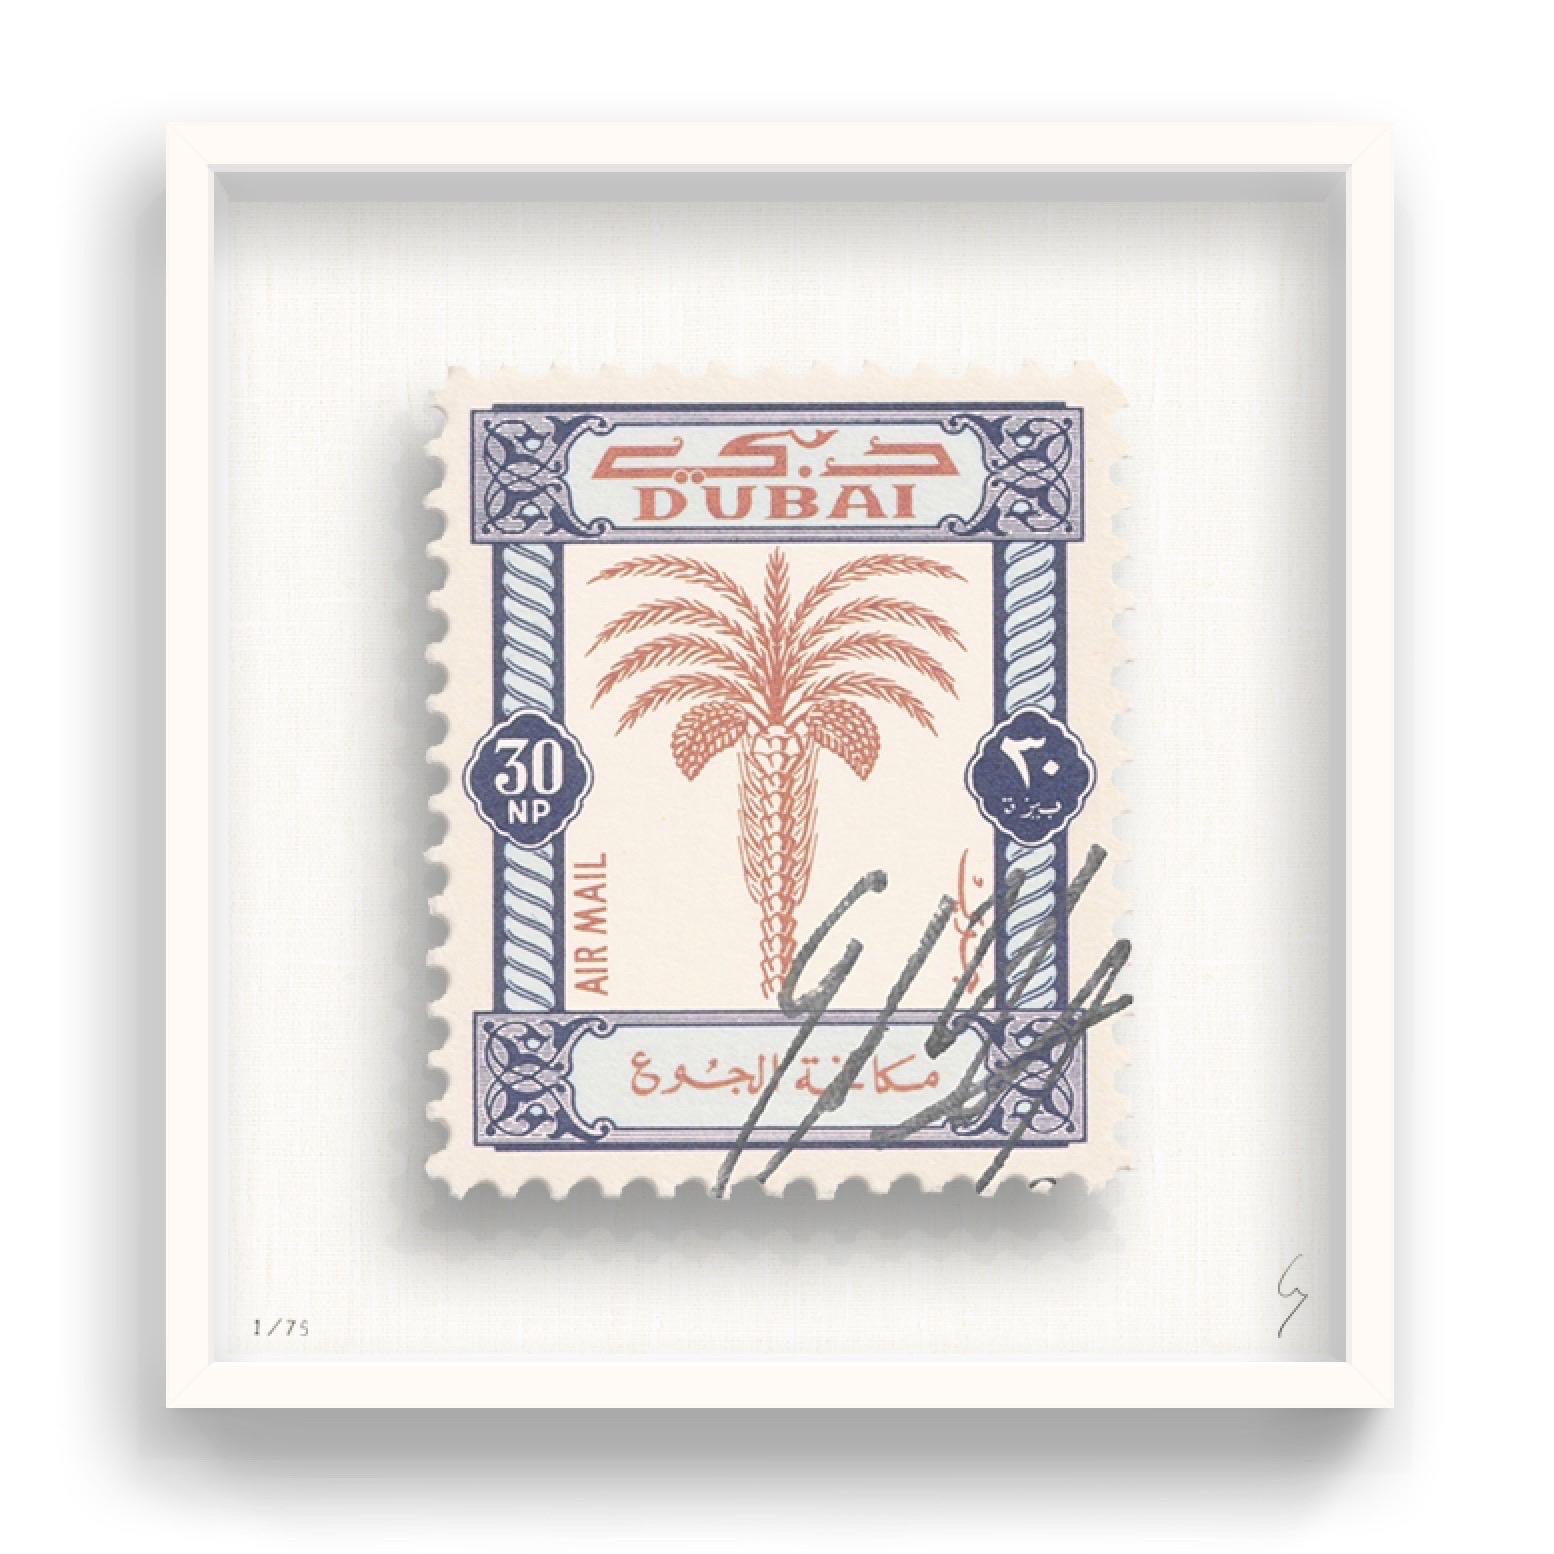 Guy Gee, Dubai (medium)

Hand-engraved print on 350gsm on G.F Smith card
53 x 56cm (20 4/5 x 22 2/5 in)
Frame included 
Edition of 75 

Each artwork by Guy had been digitally reimagined from an original postage stamp. Cut out and finished by hand,